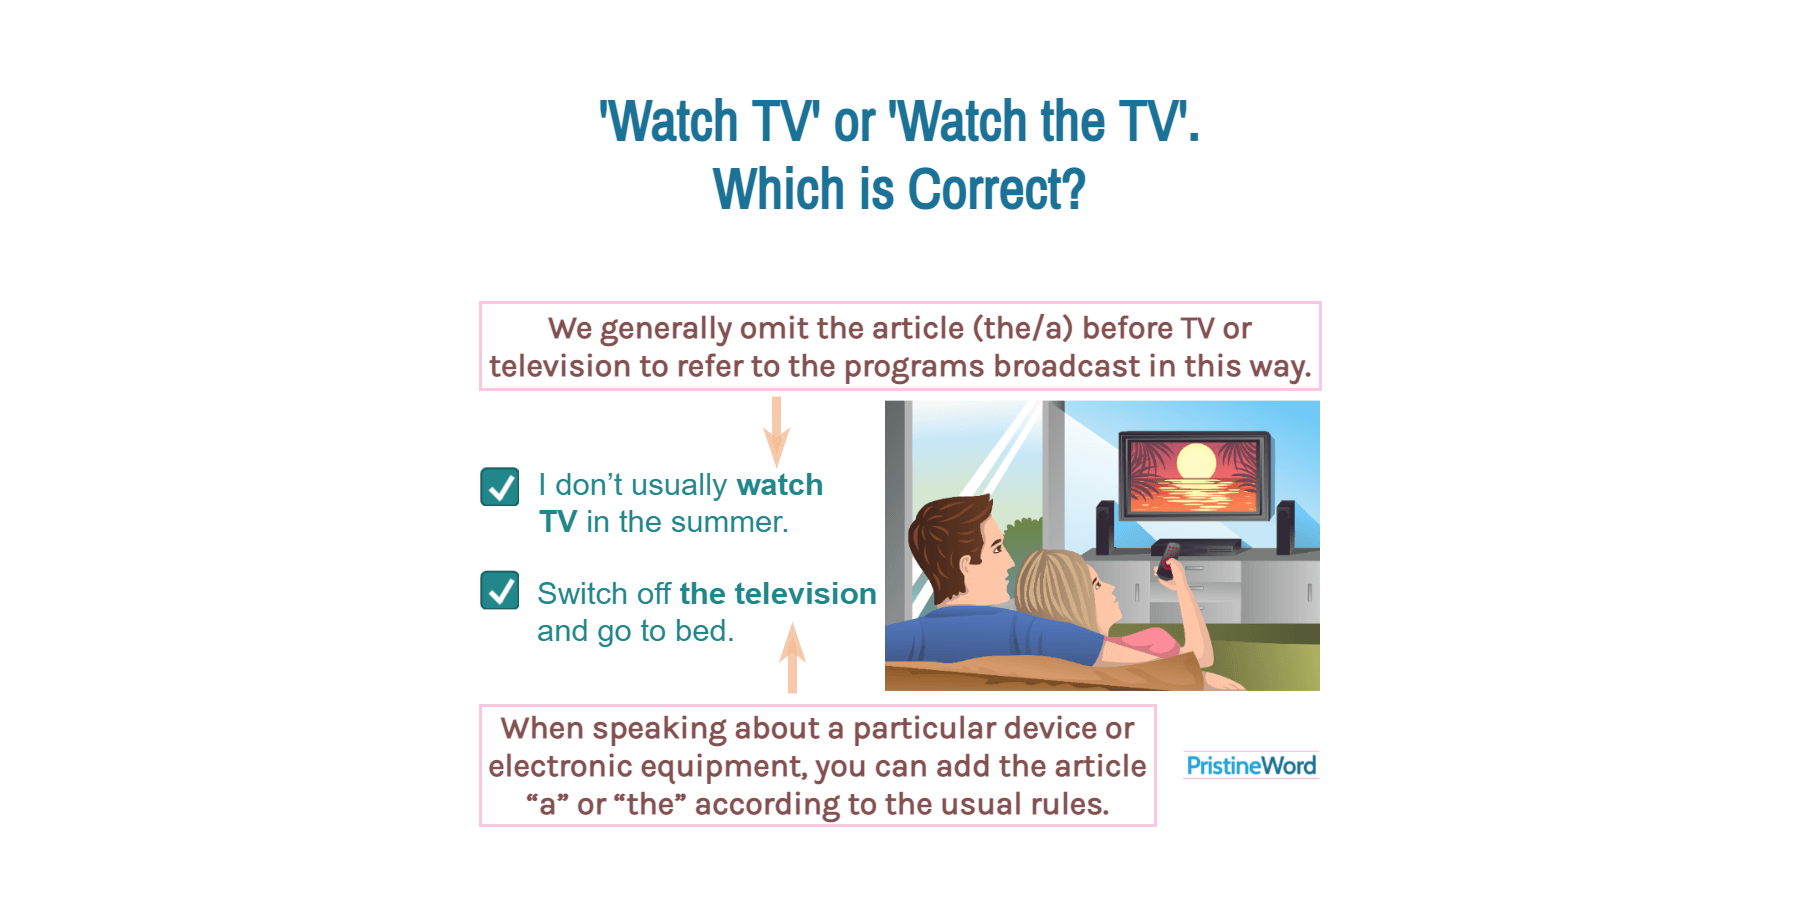 Watch TV or Watch the TV. Which is Correct?